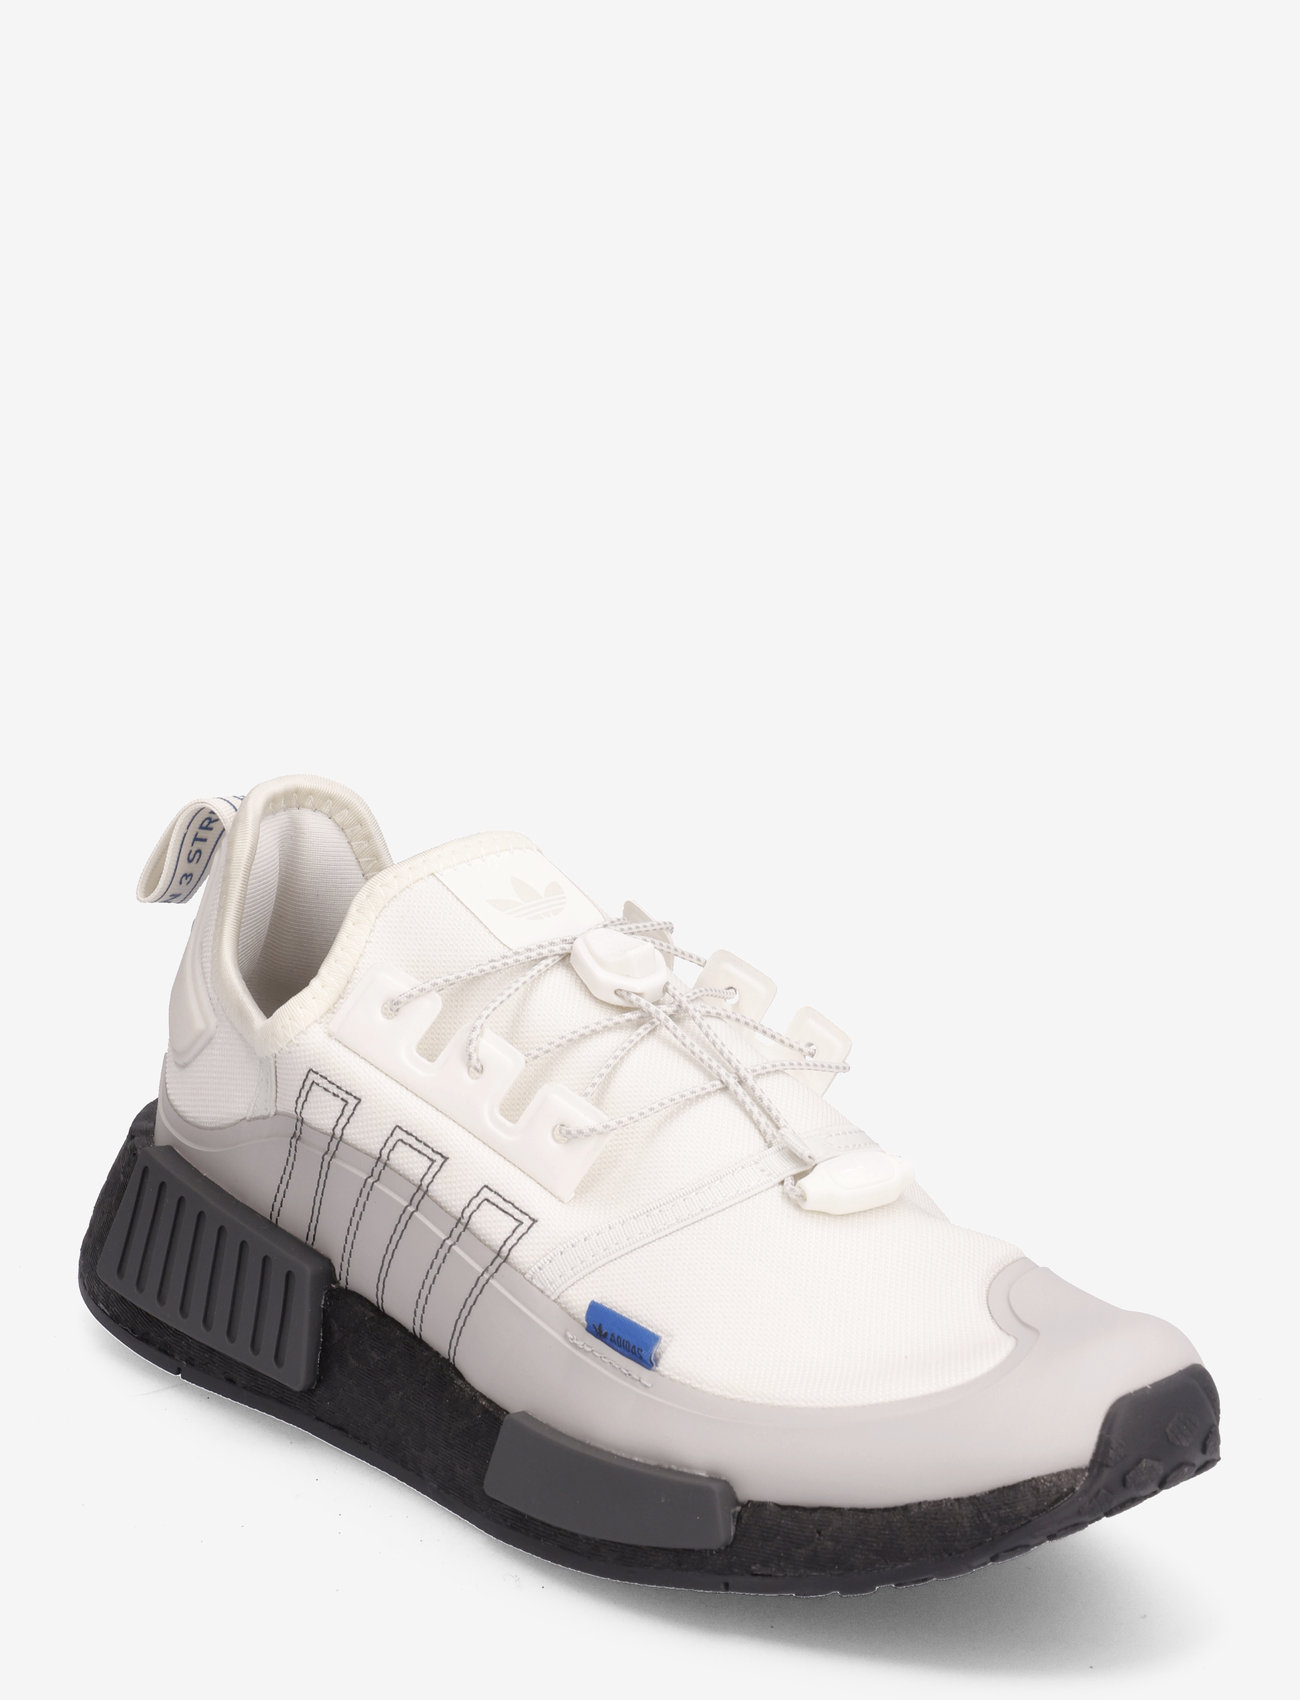 adidas Originals - NMD_R1 Shoes - lave sneakers - owhite/gretwo/gresix - 0